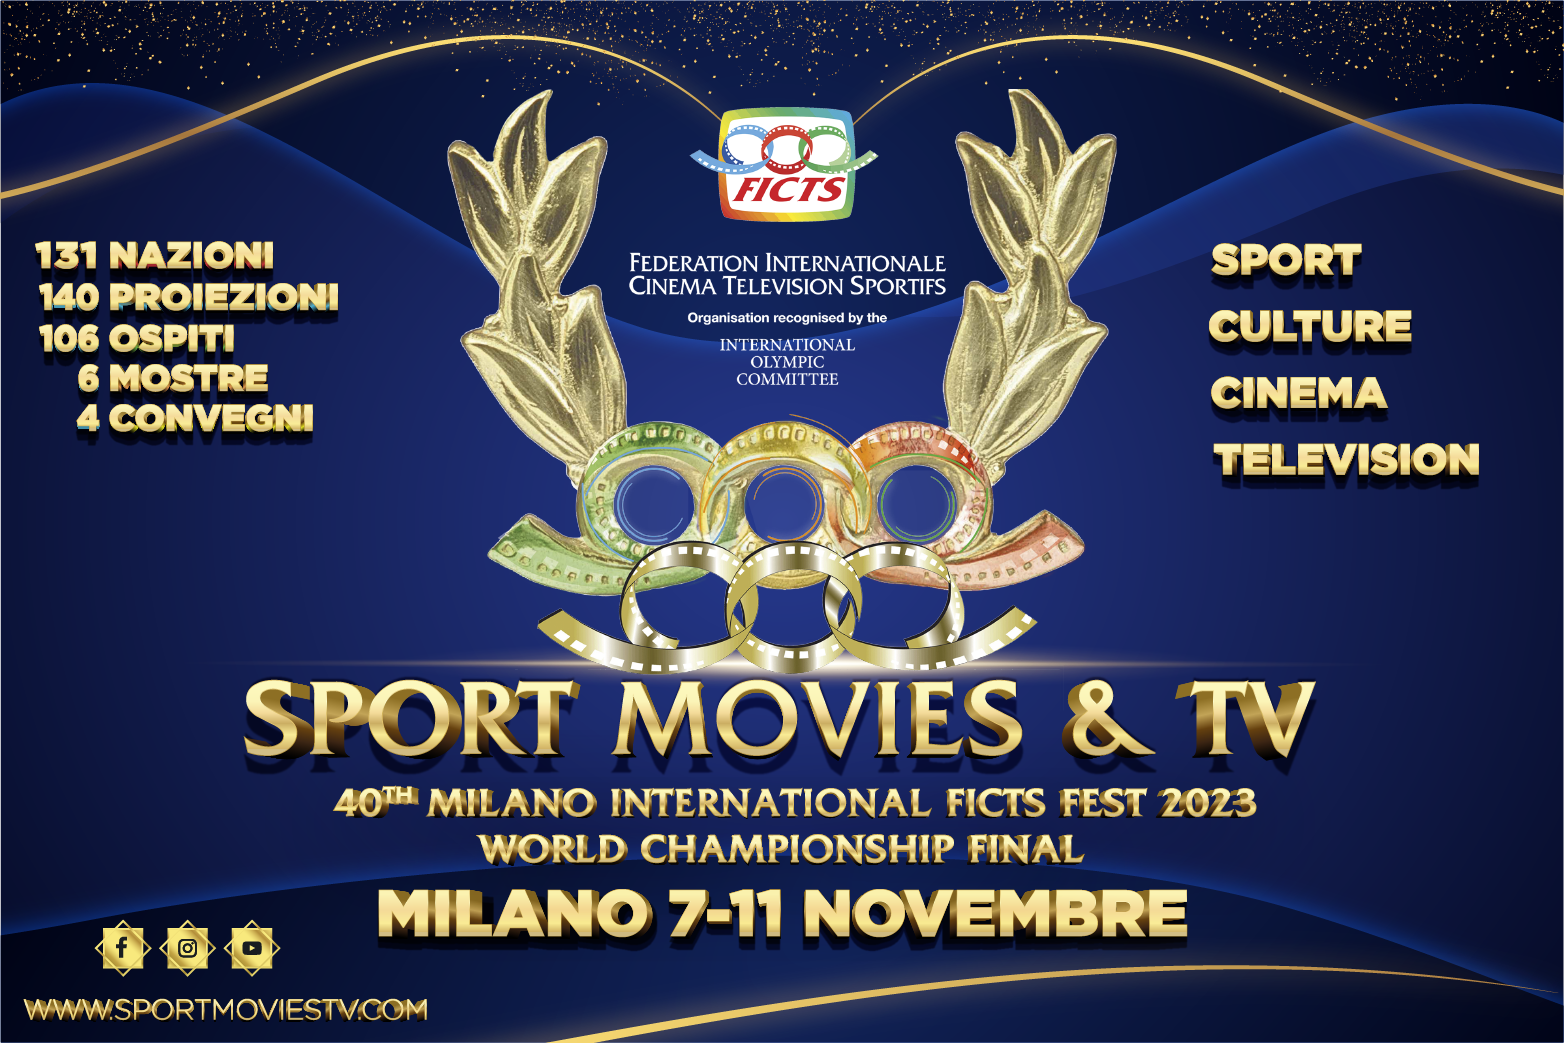 40 YEARS OF CINEMA AND SPORT FOR 130 COUNTRIES